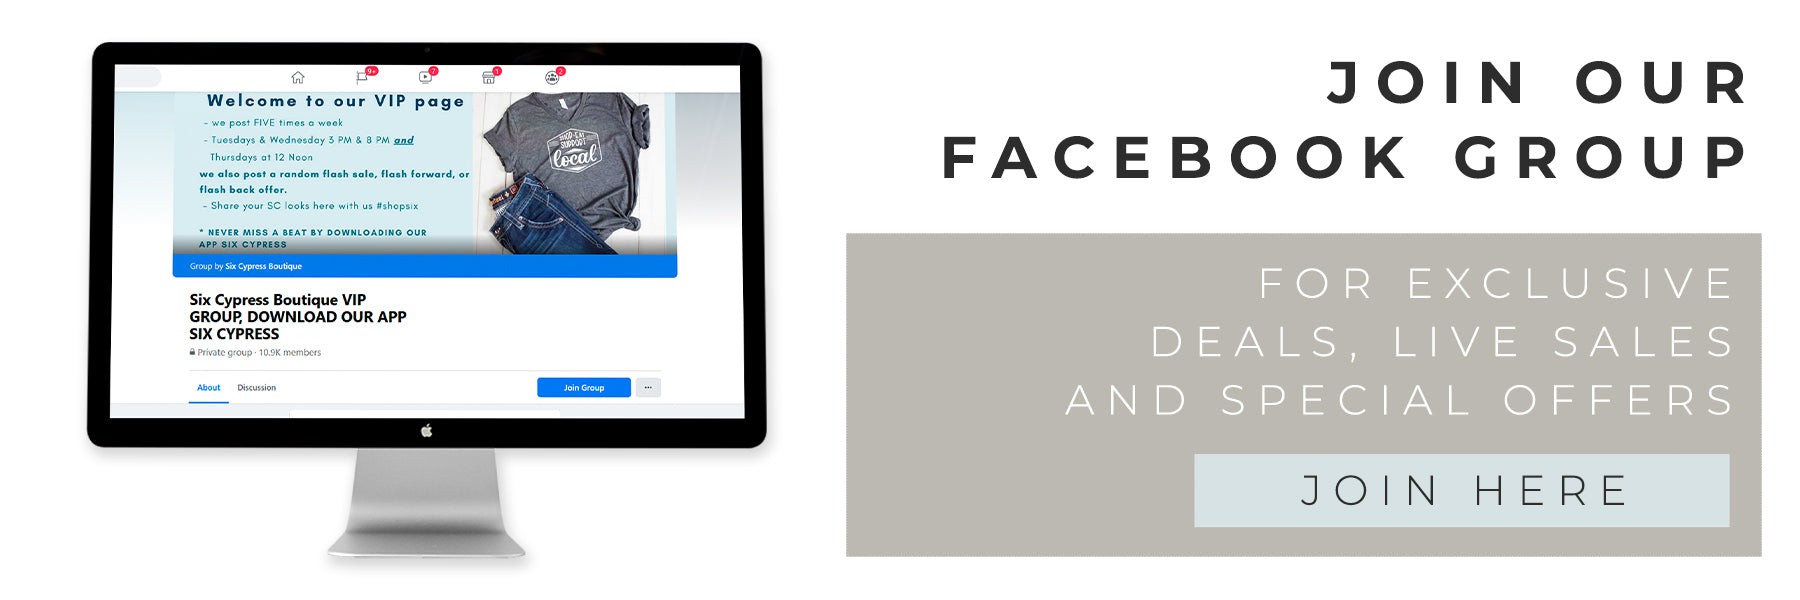 Join our Facebook Group for exclusive deals, live sales, and special offers! Join here 